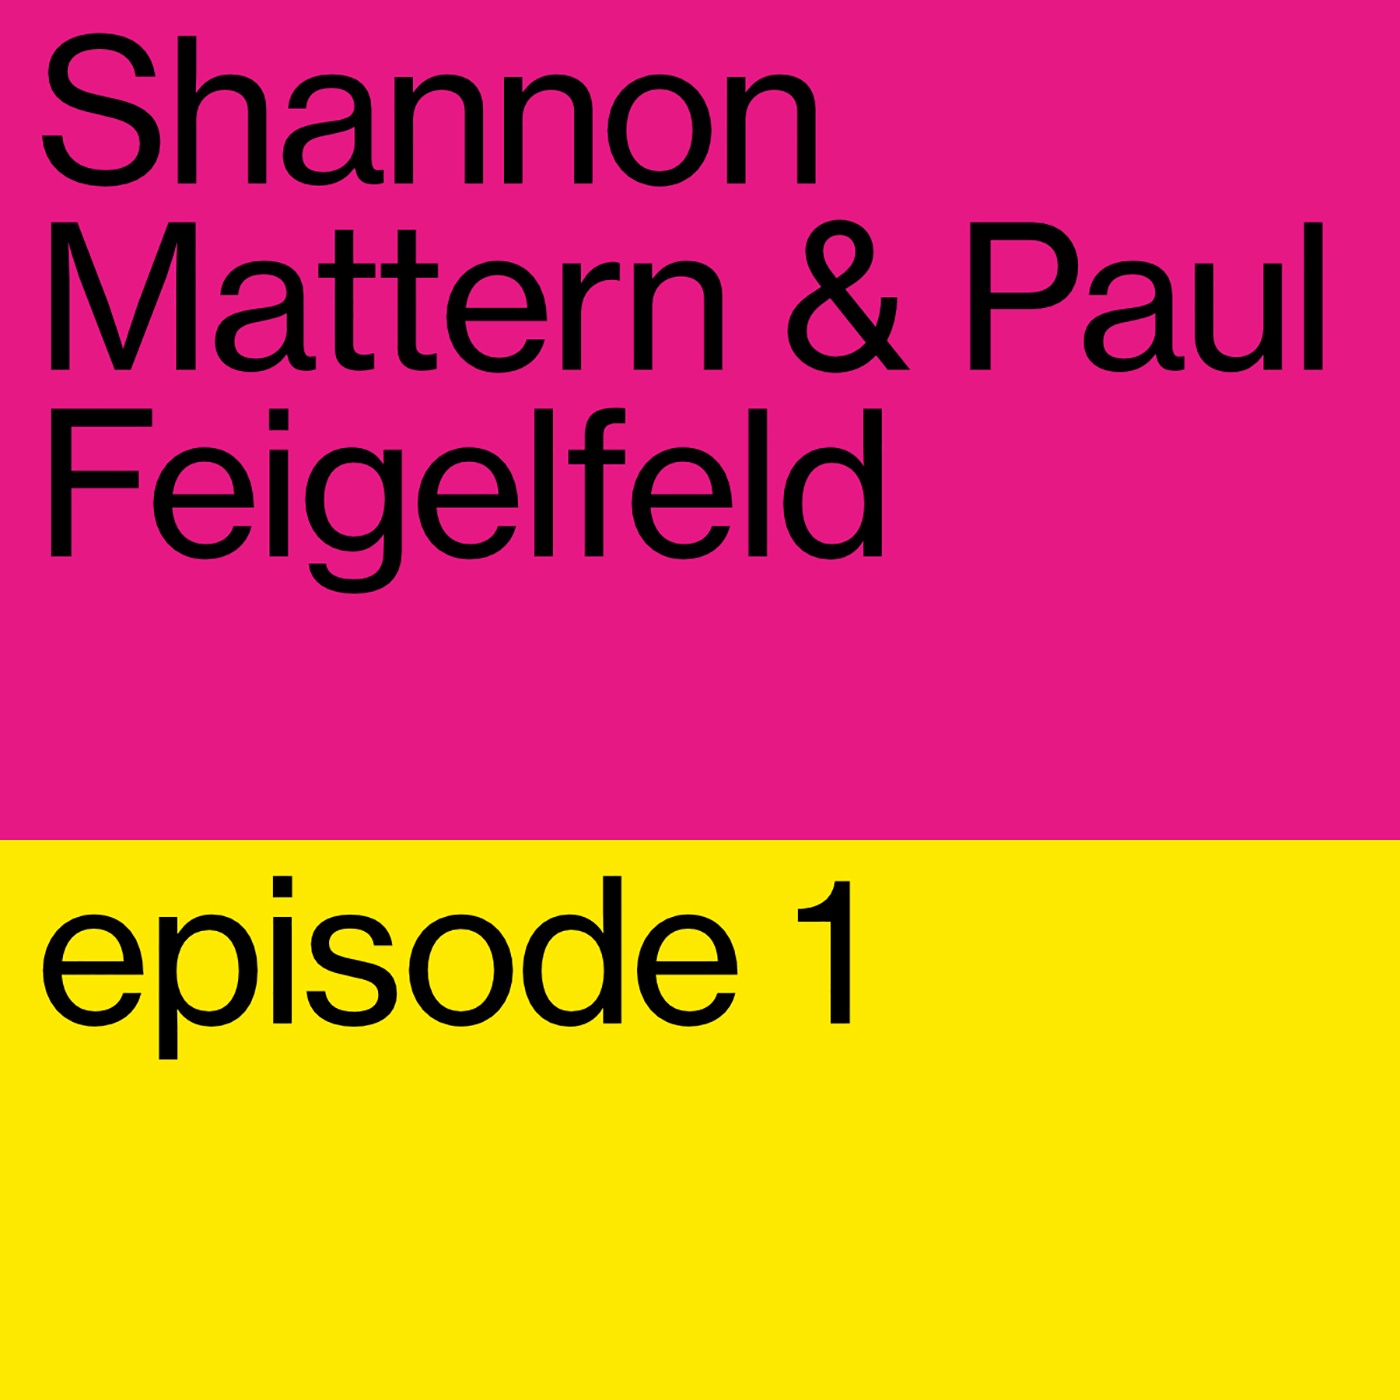 Shannon Mattern & Paul Feigelfeld: The Relationship Between Culture and Technology